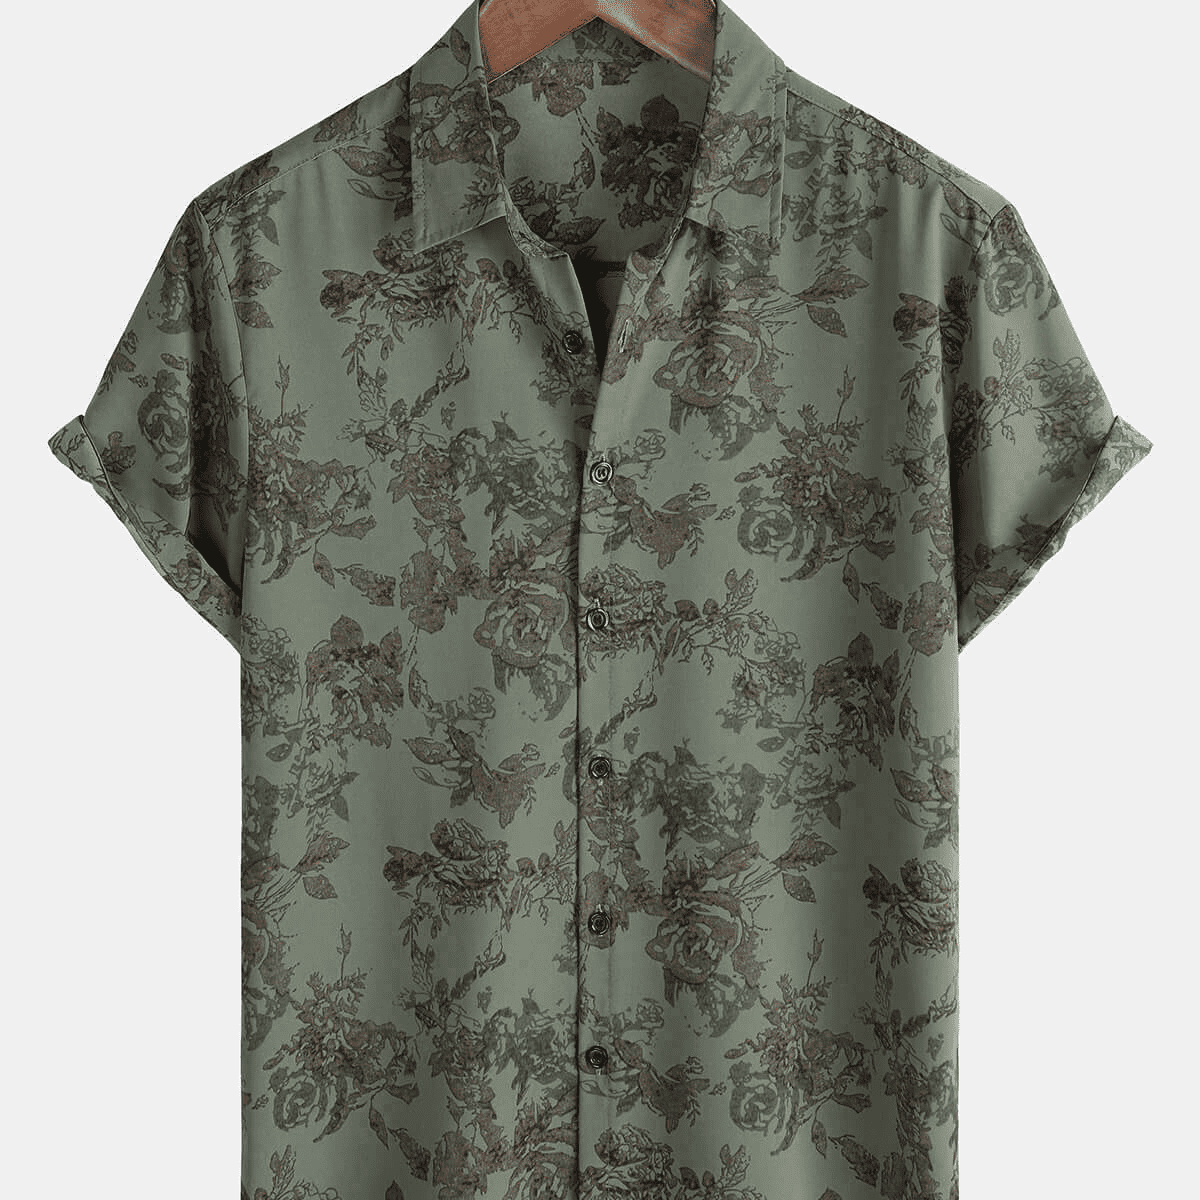 Men's Casual Floral Holiday Short Sleeve Summer Button Up Shirt